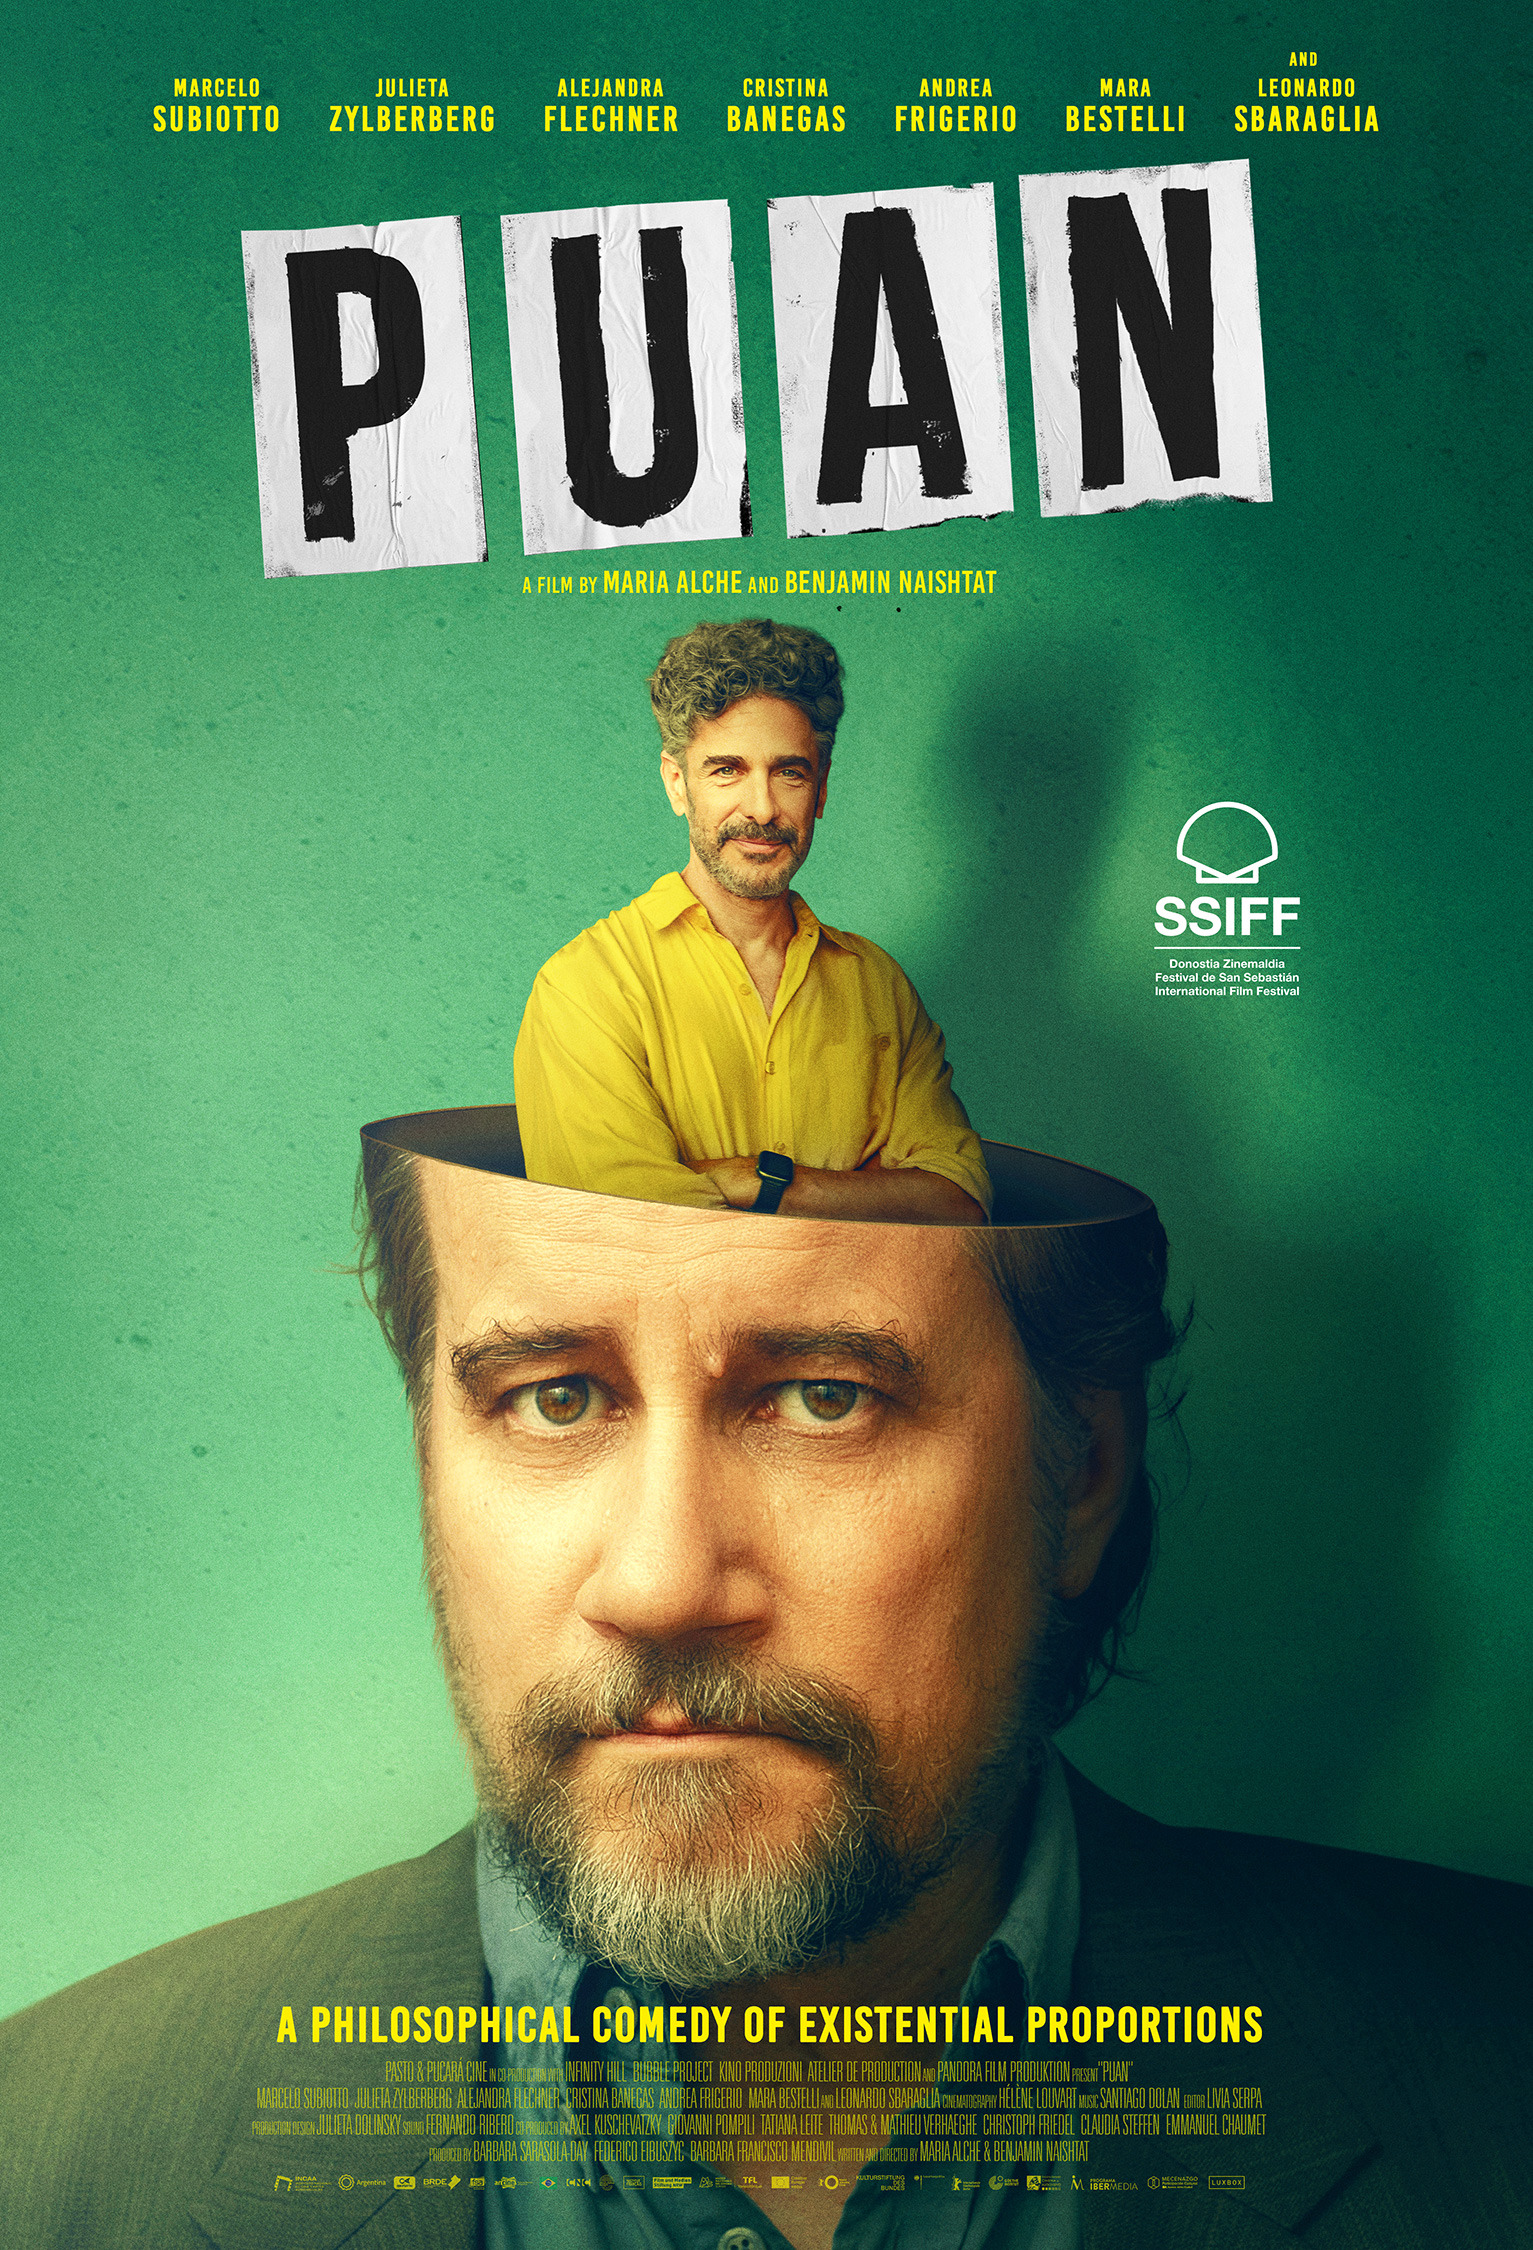 Mega Sized Movie Poster Image for Puan (#2 of 3)